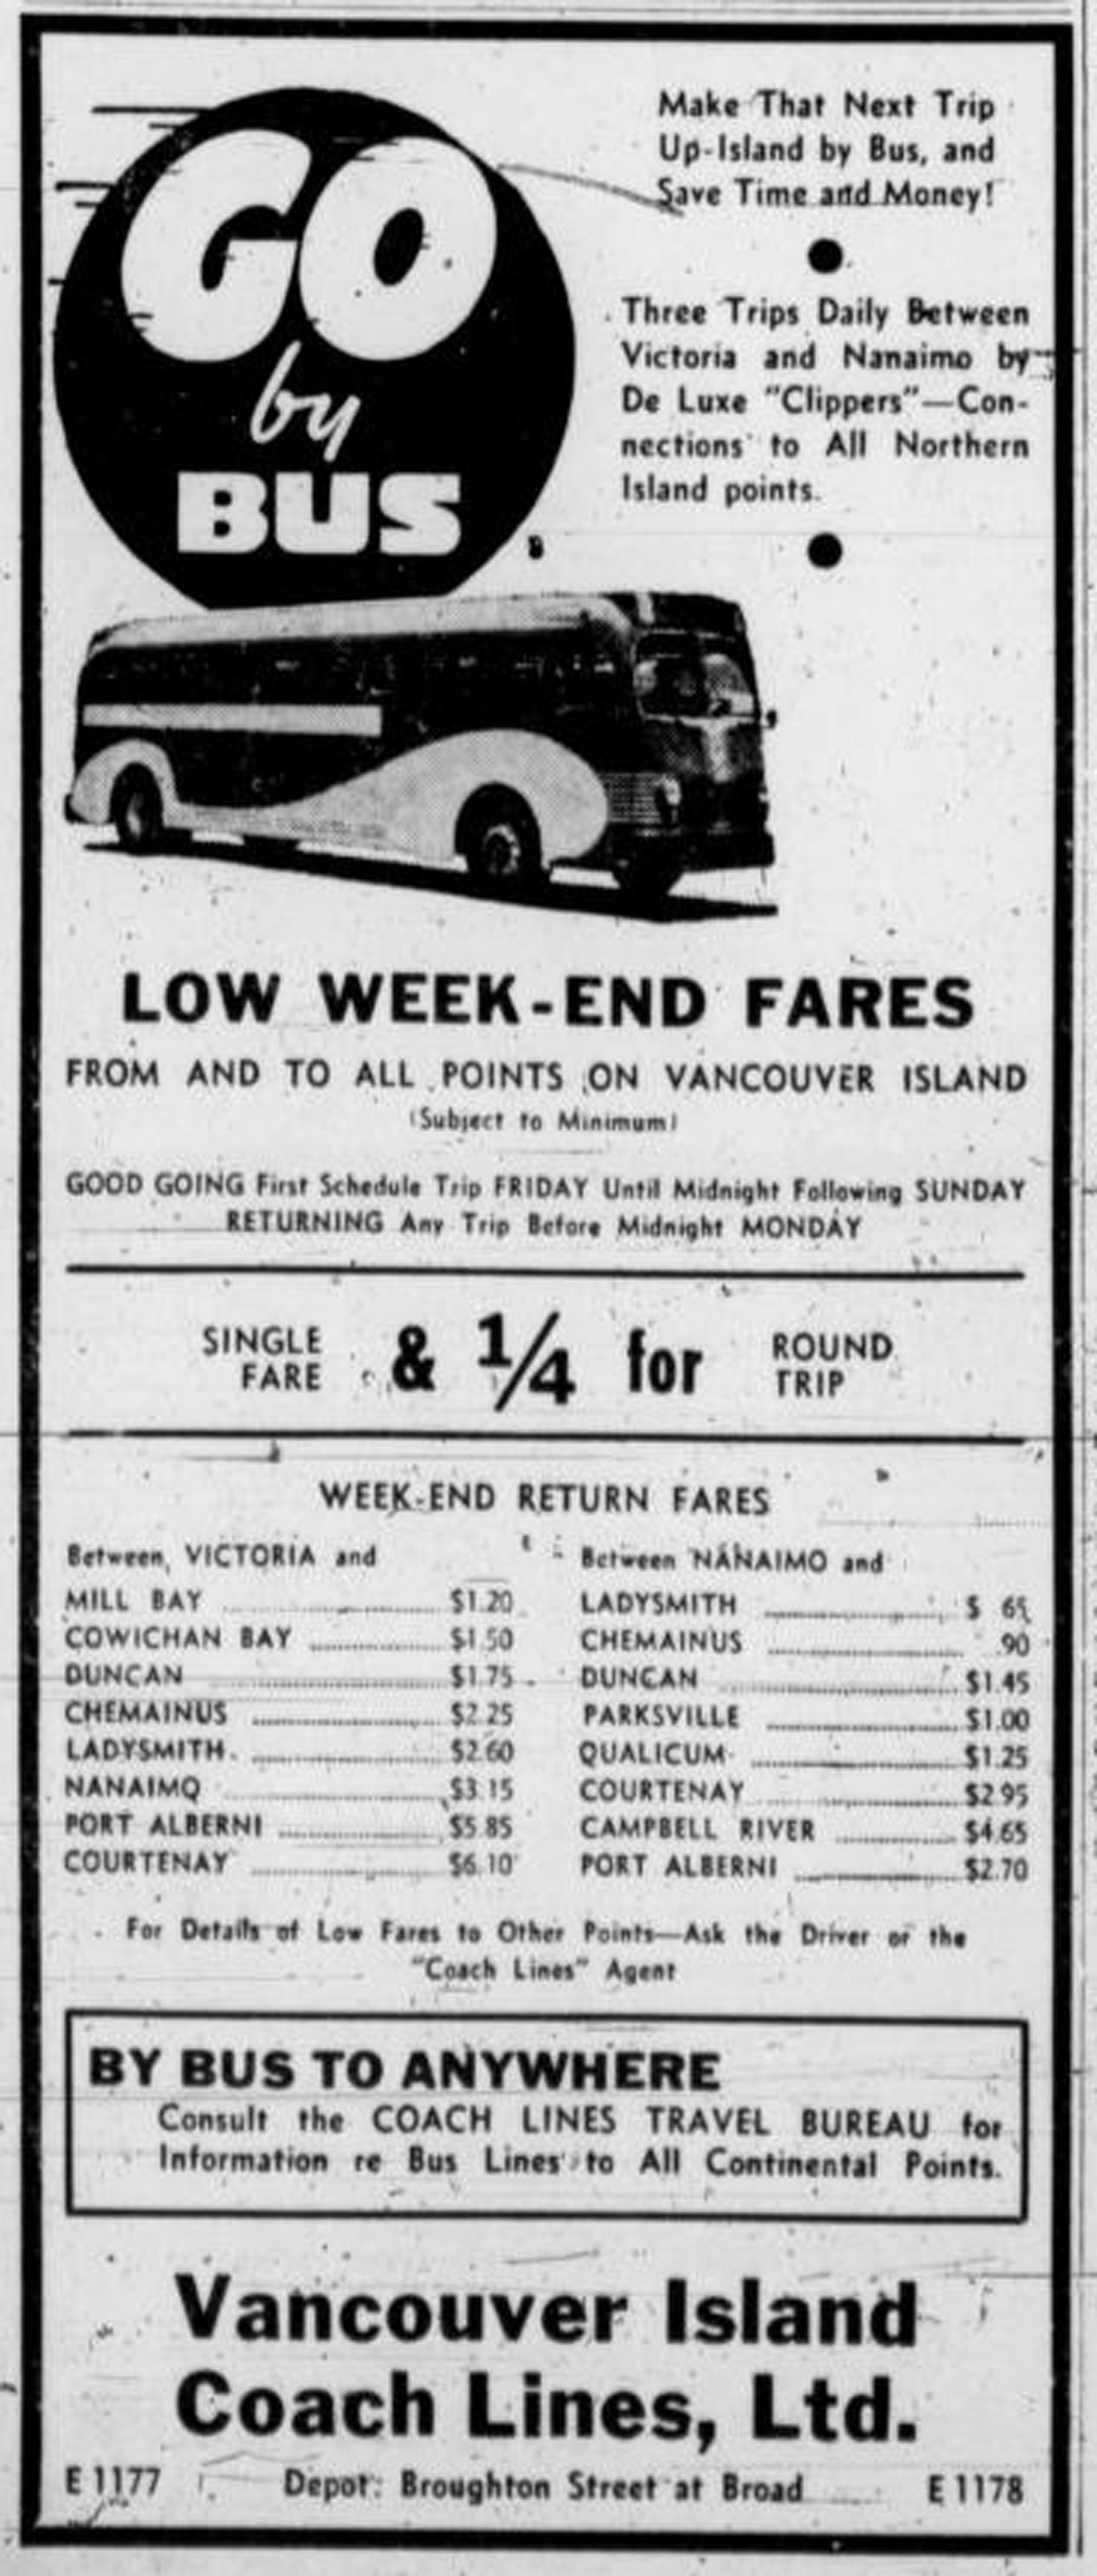 1940 advertisement for Vancouver Island Coach Lines, showing fares between Victoria and other Vancouver Island locations (Victoria Online Sightseeing Tours collection)